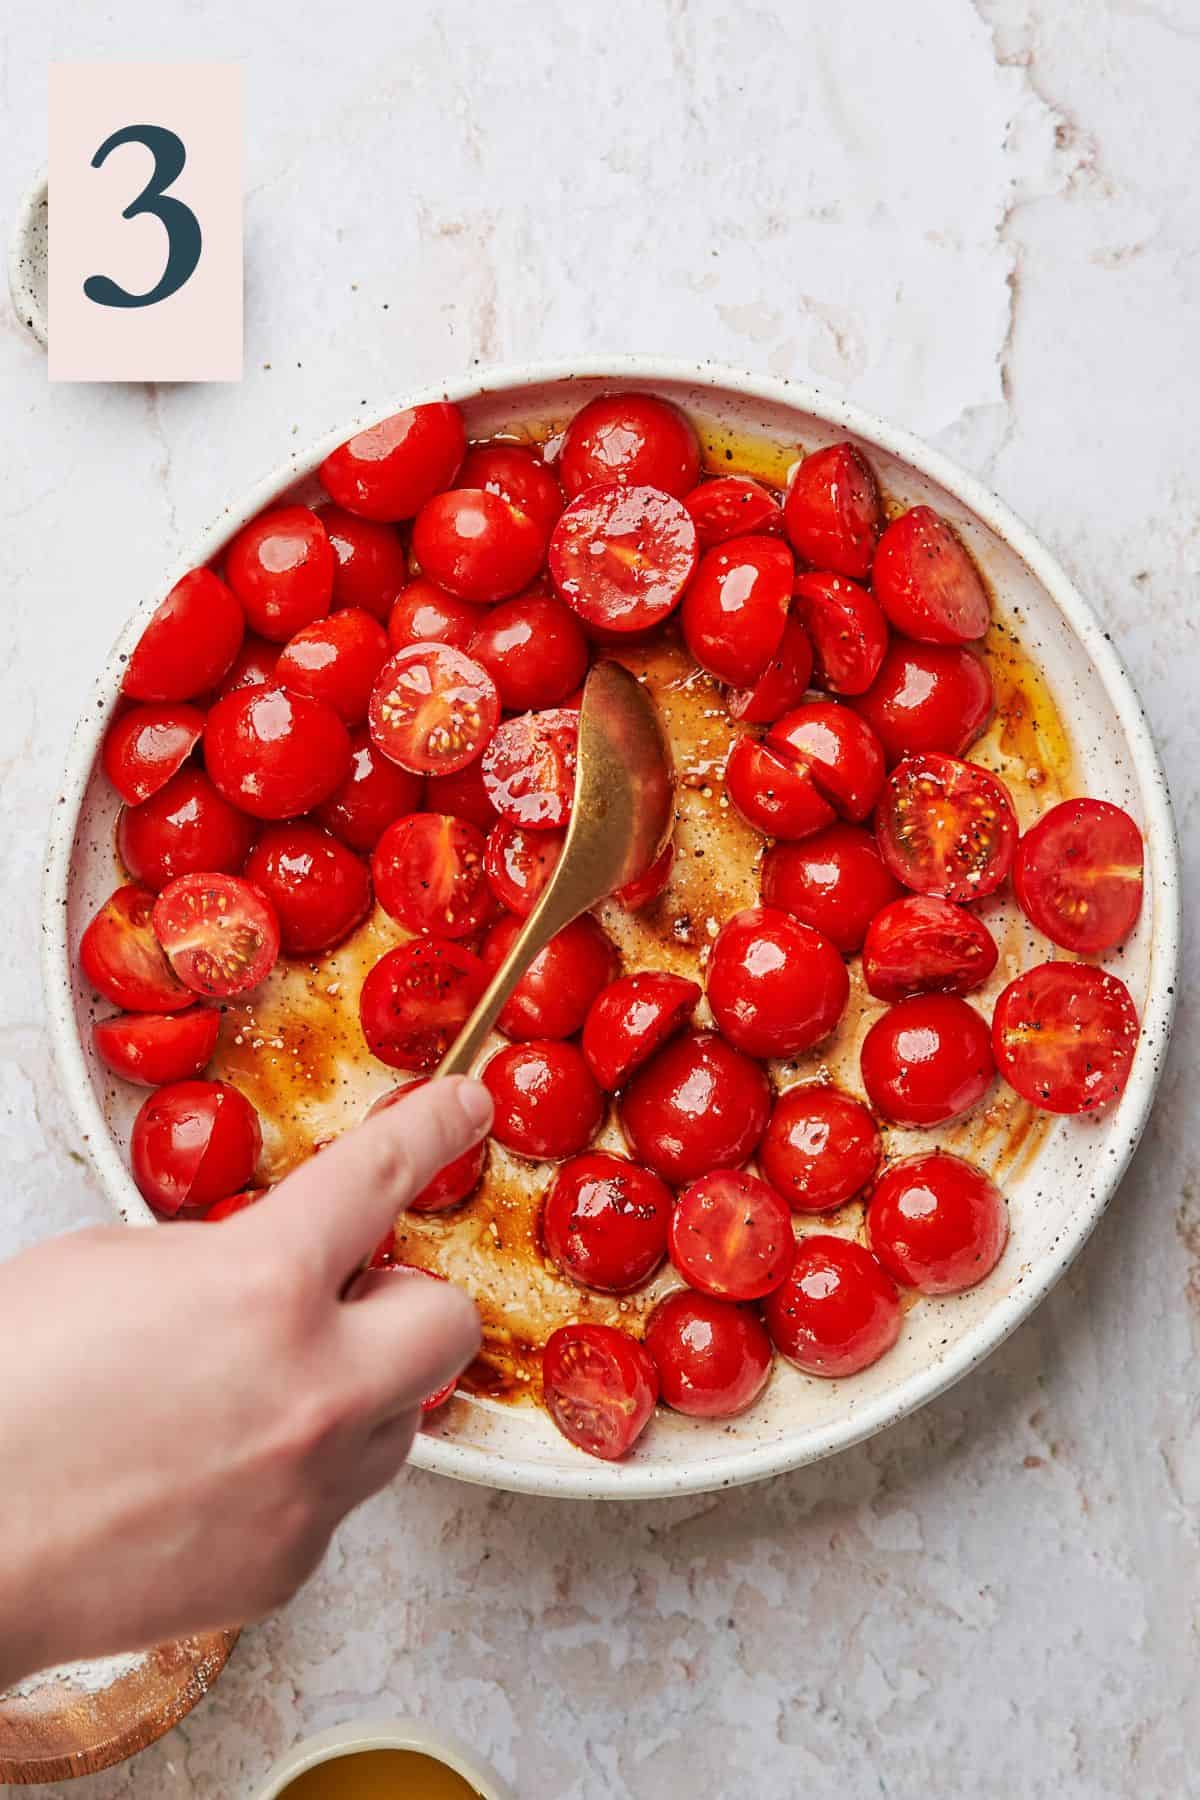 Cherry tomatoes topped with olive oil and tossed to coat evenly.